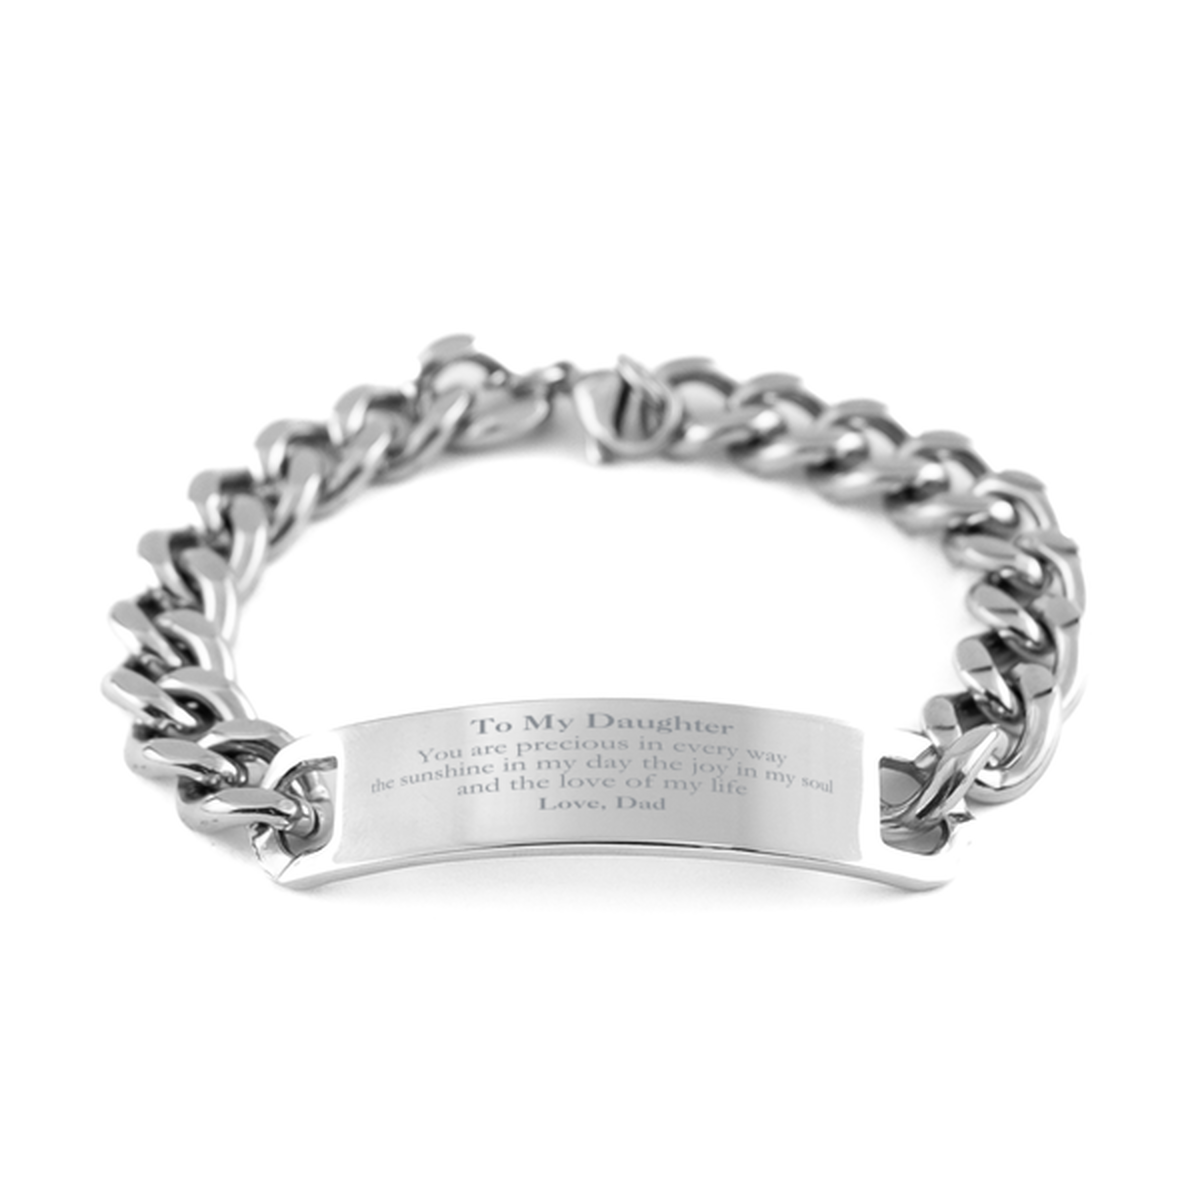 Graduation Gifts for Daughter Cuban Chain Stainless Steel Bracelet Present from Dad, Christmas Daughter Birthday Gifts Daughter You are precious in every way the sunshine in my day. Love, Dad